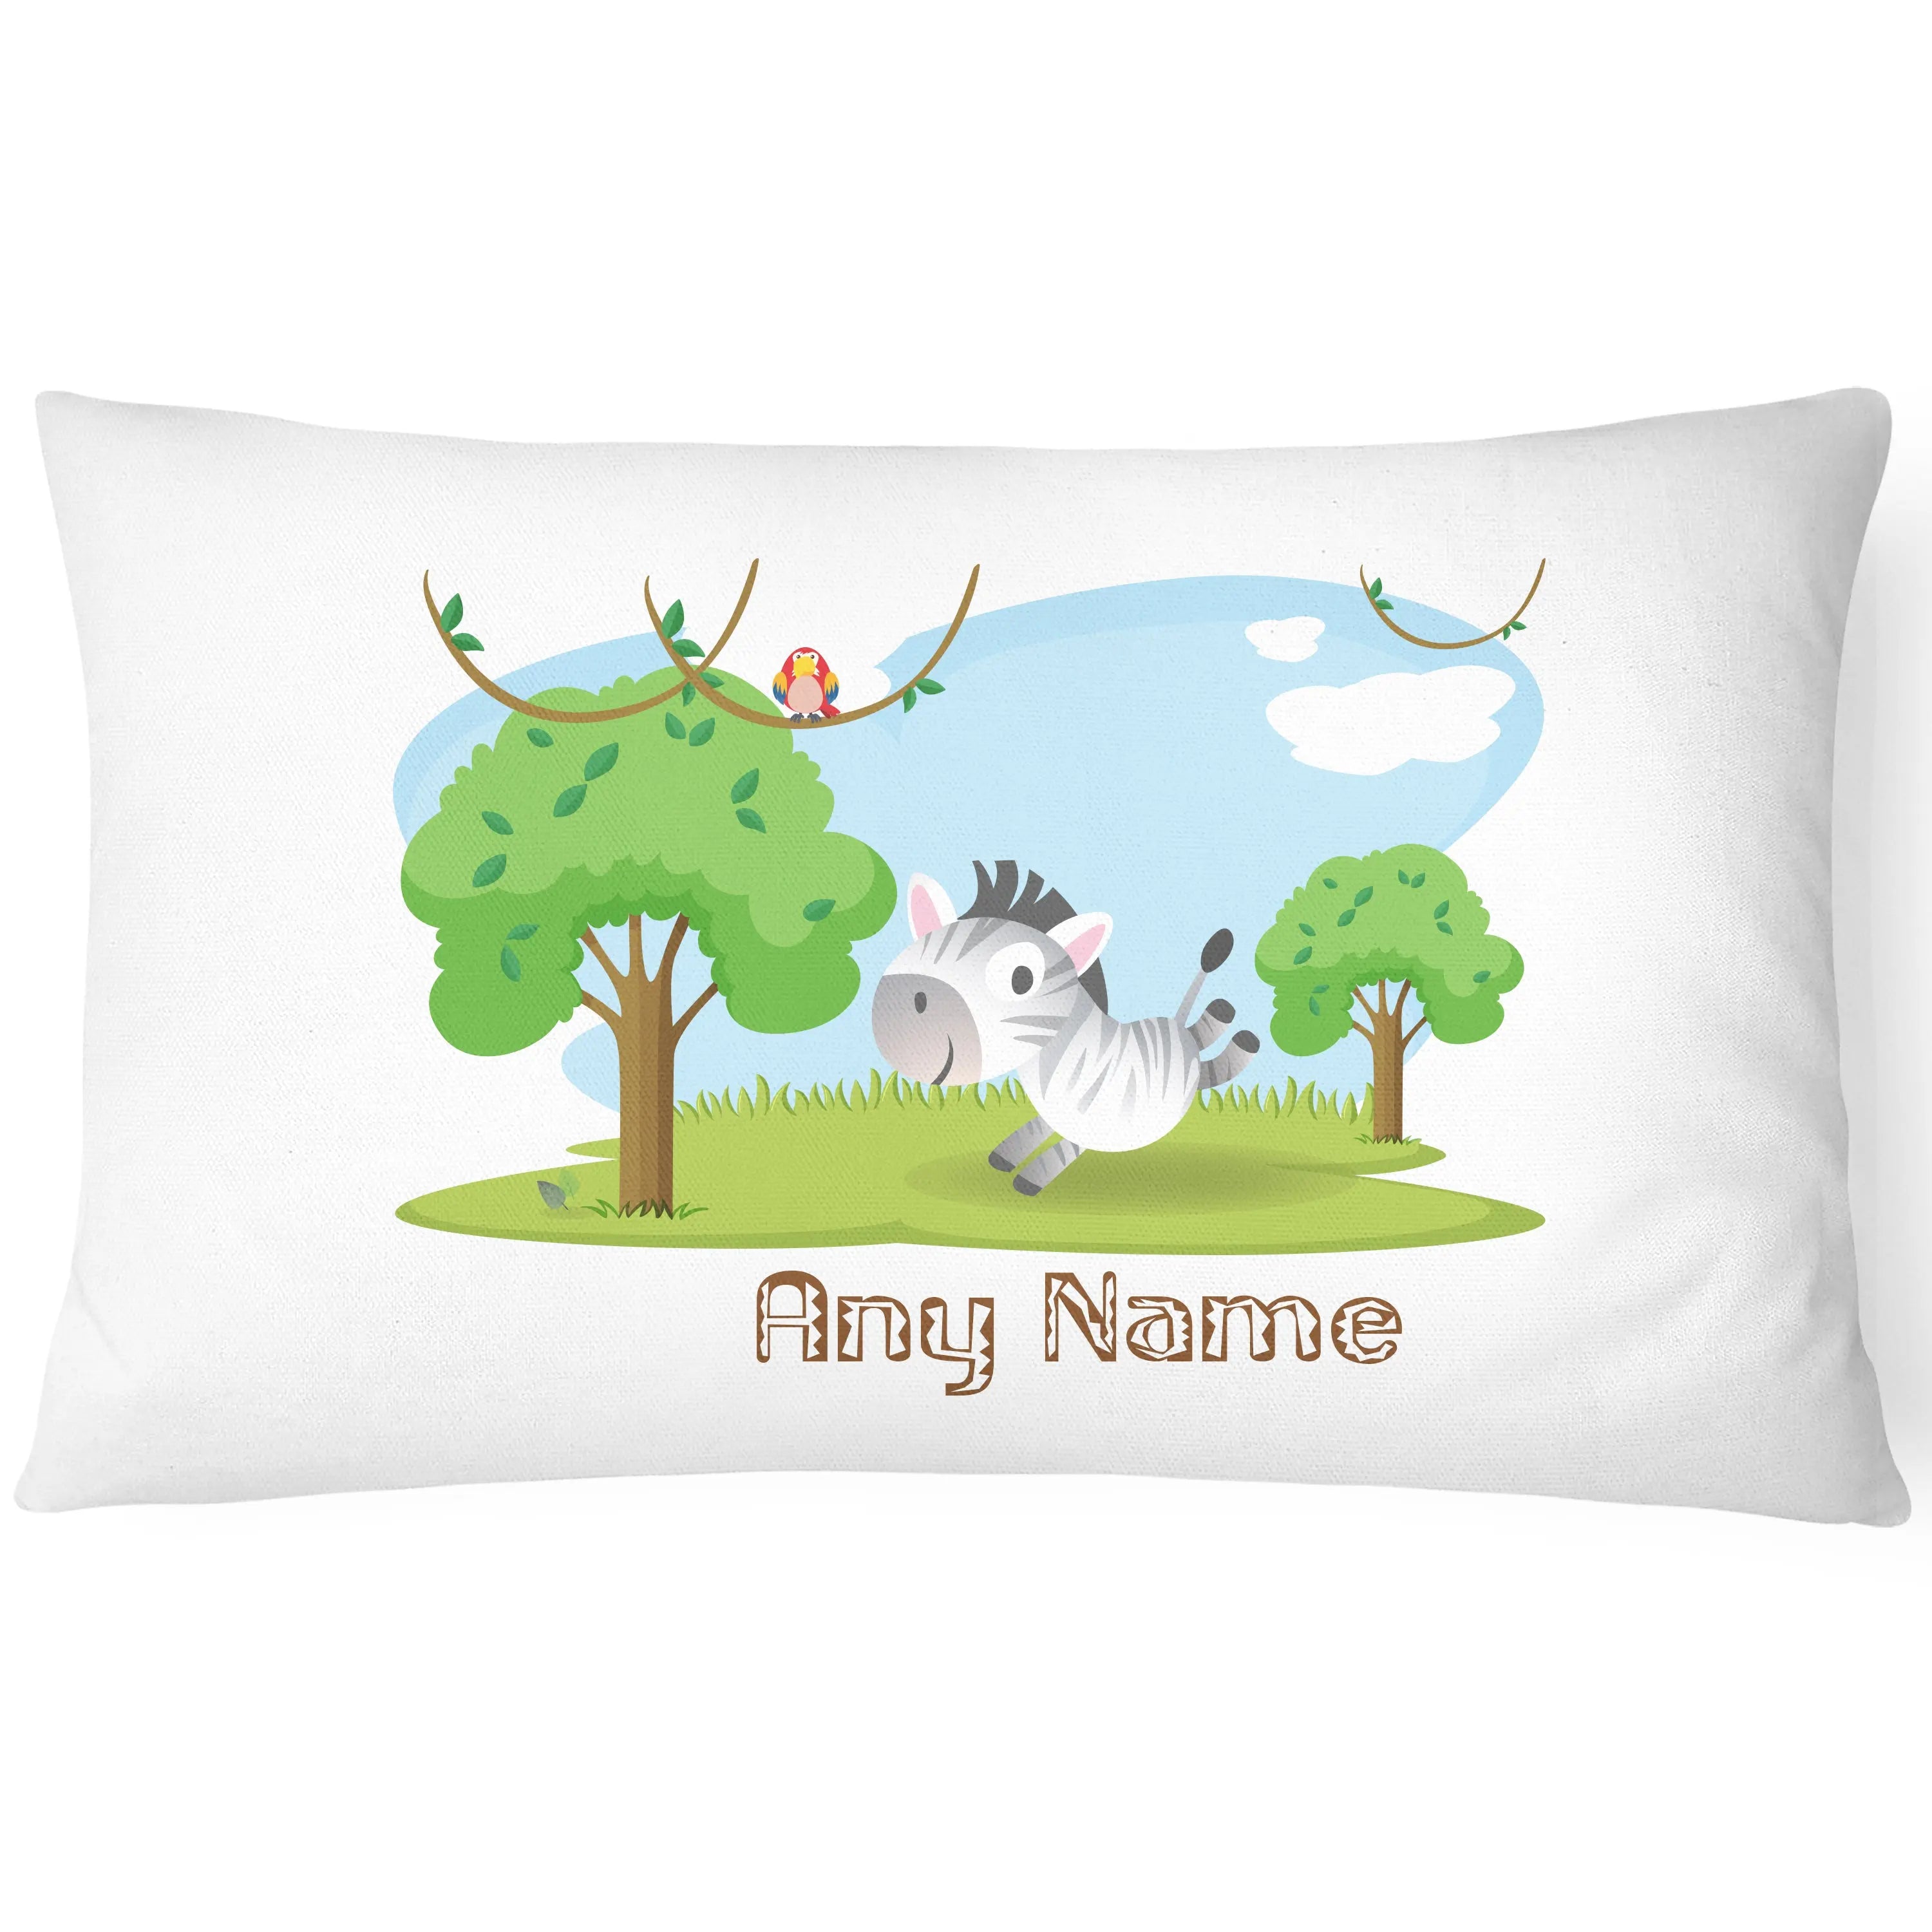 Cute Animal Zoo - Children's Pillowcase - Personalise with Any Name - Zebra